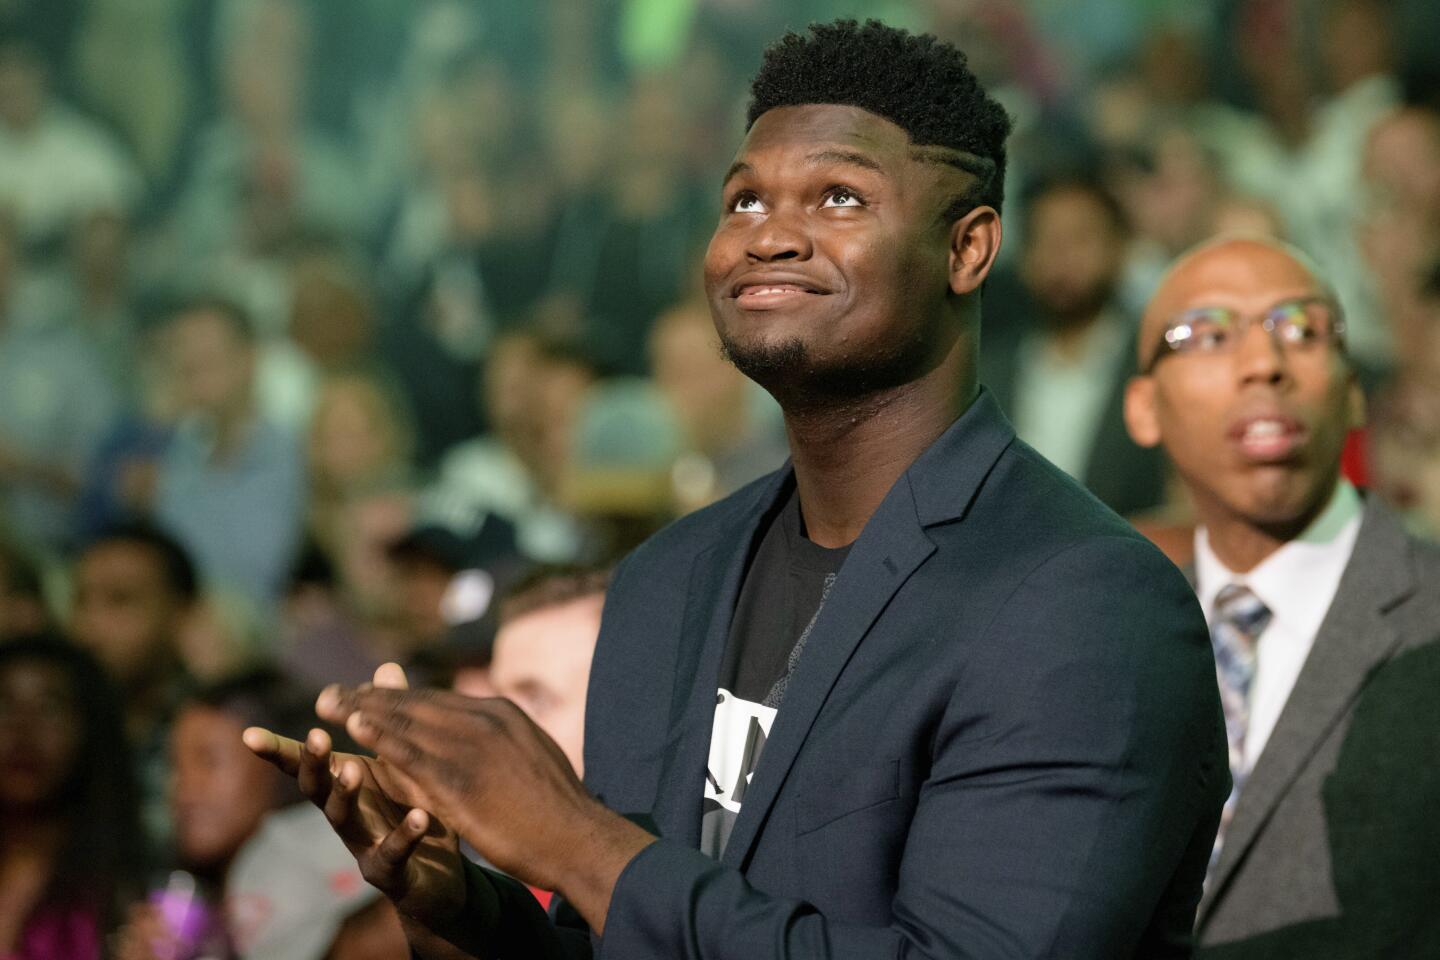 Pelicans forward Zion Williamson waits for a game against the Lakers on Nov. 27 to begin at Smoothie King Center.